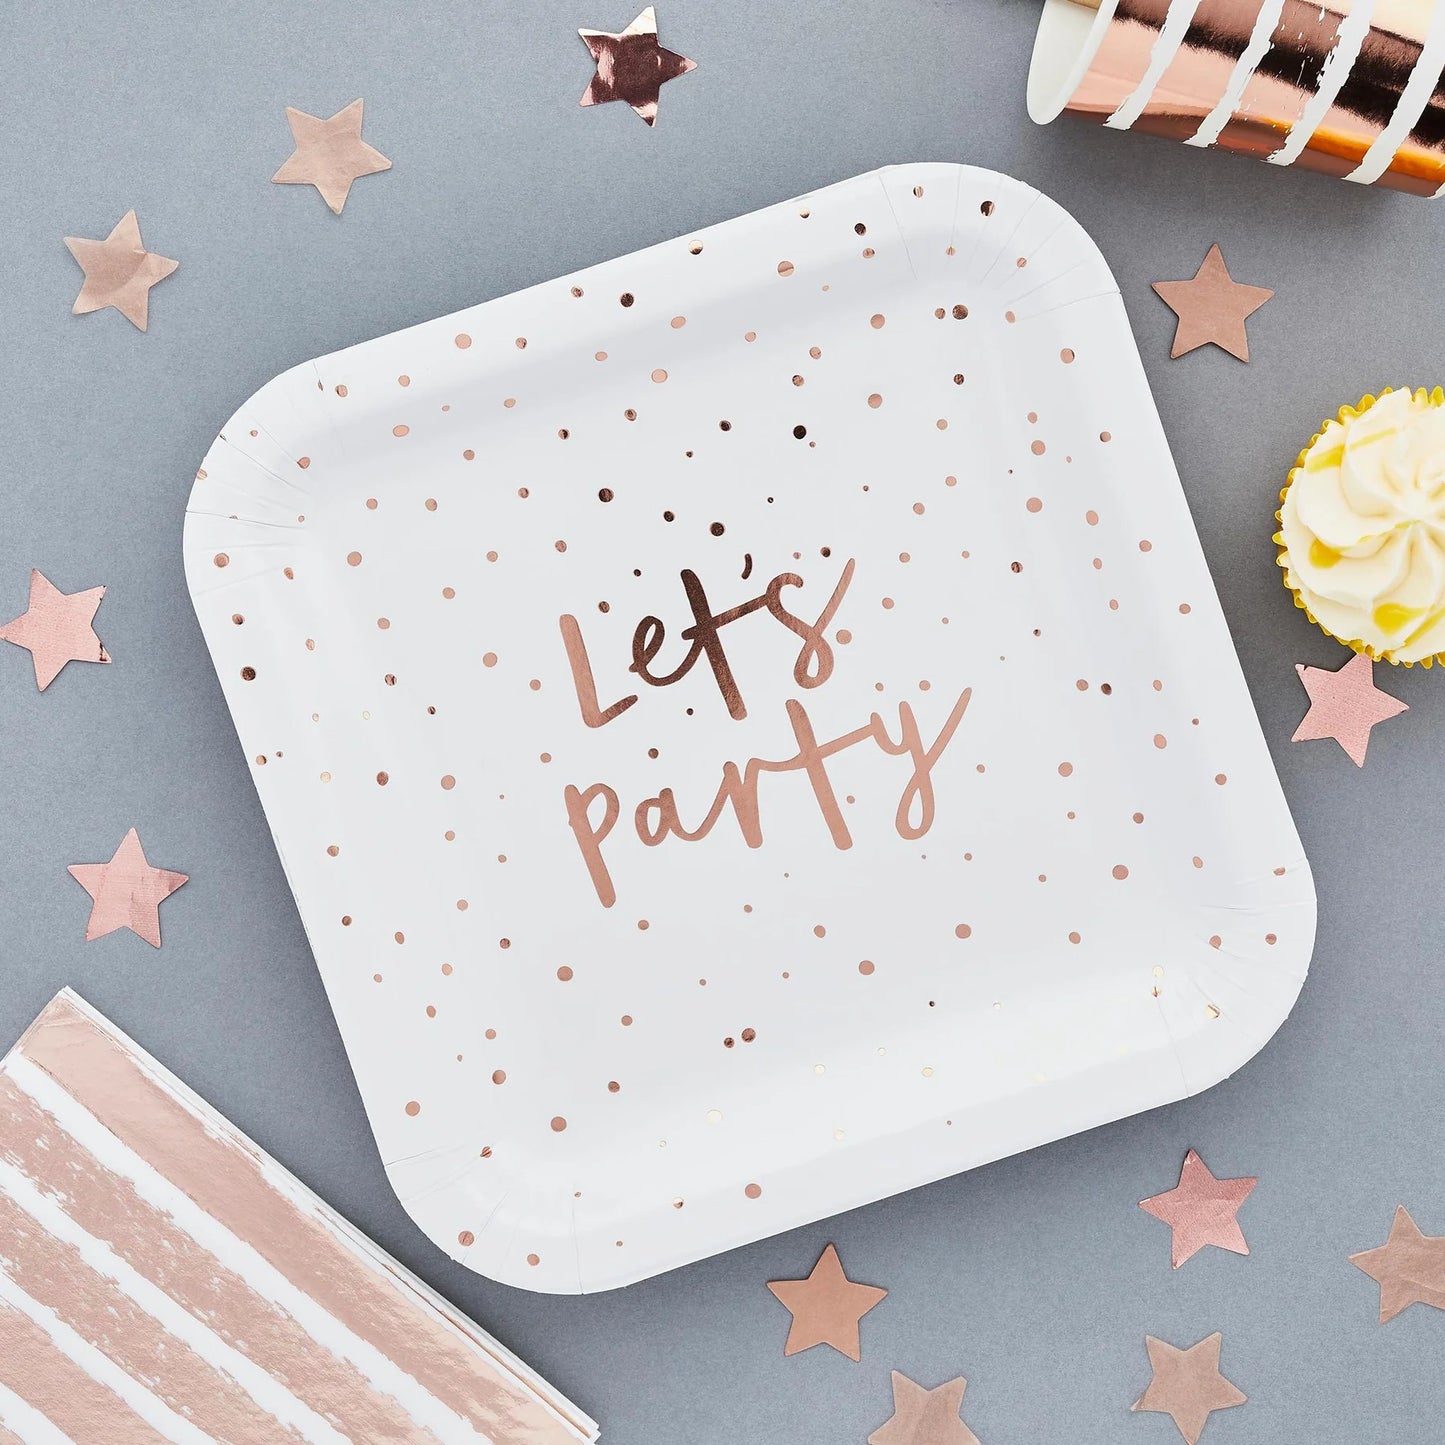 Rose Gold "Let's Party" Paper Plates